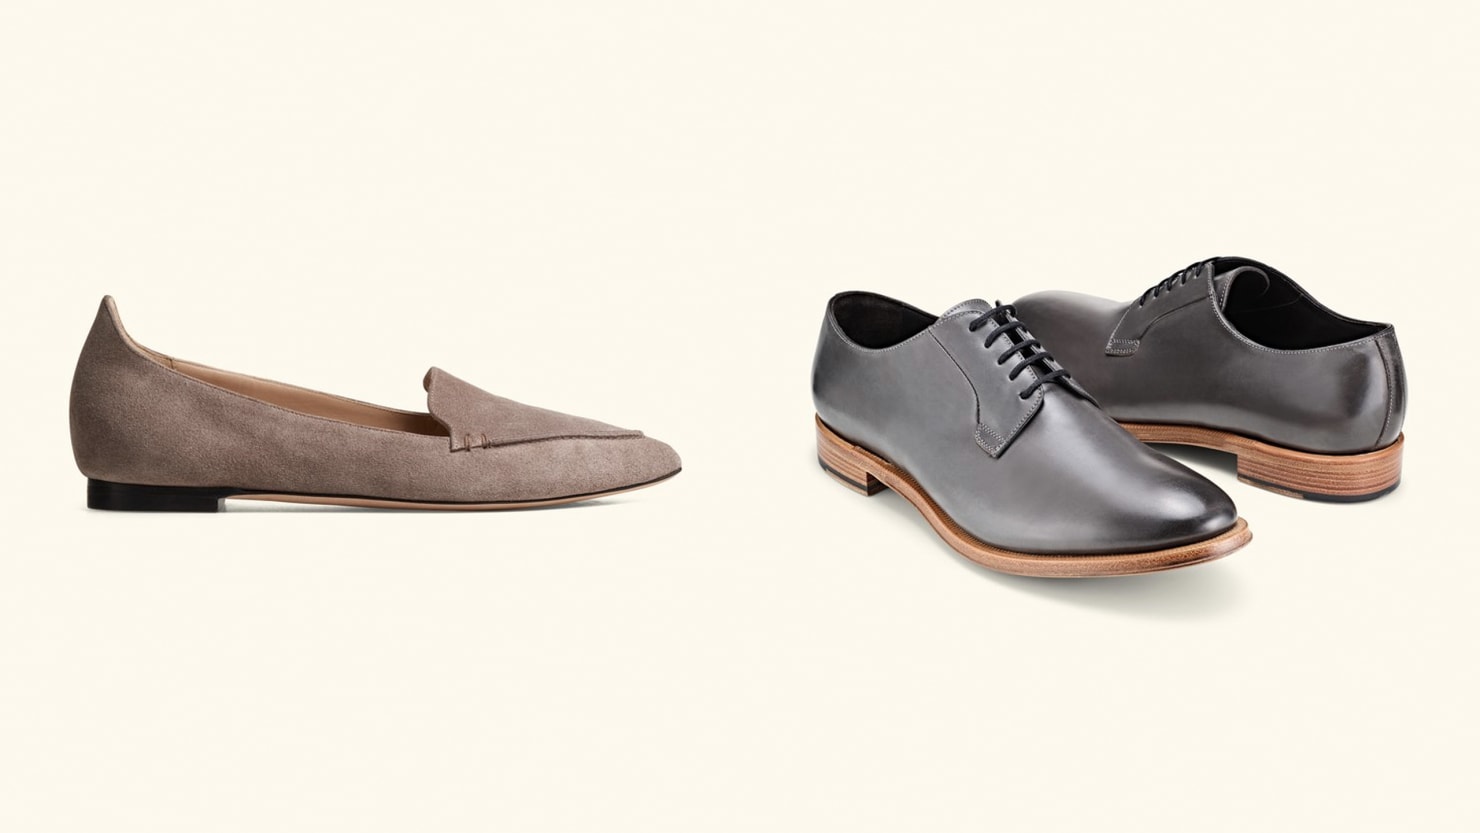 Get Up to 65% Off M.Gemi’s Handmade, Italian Shoes